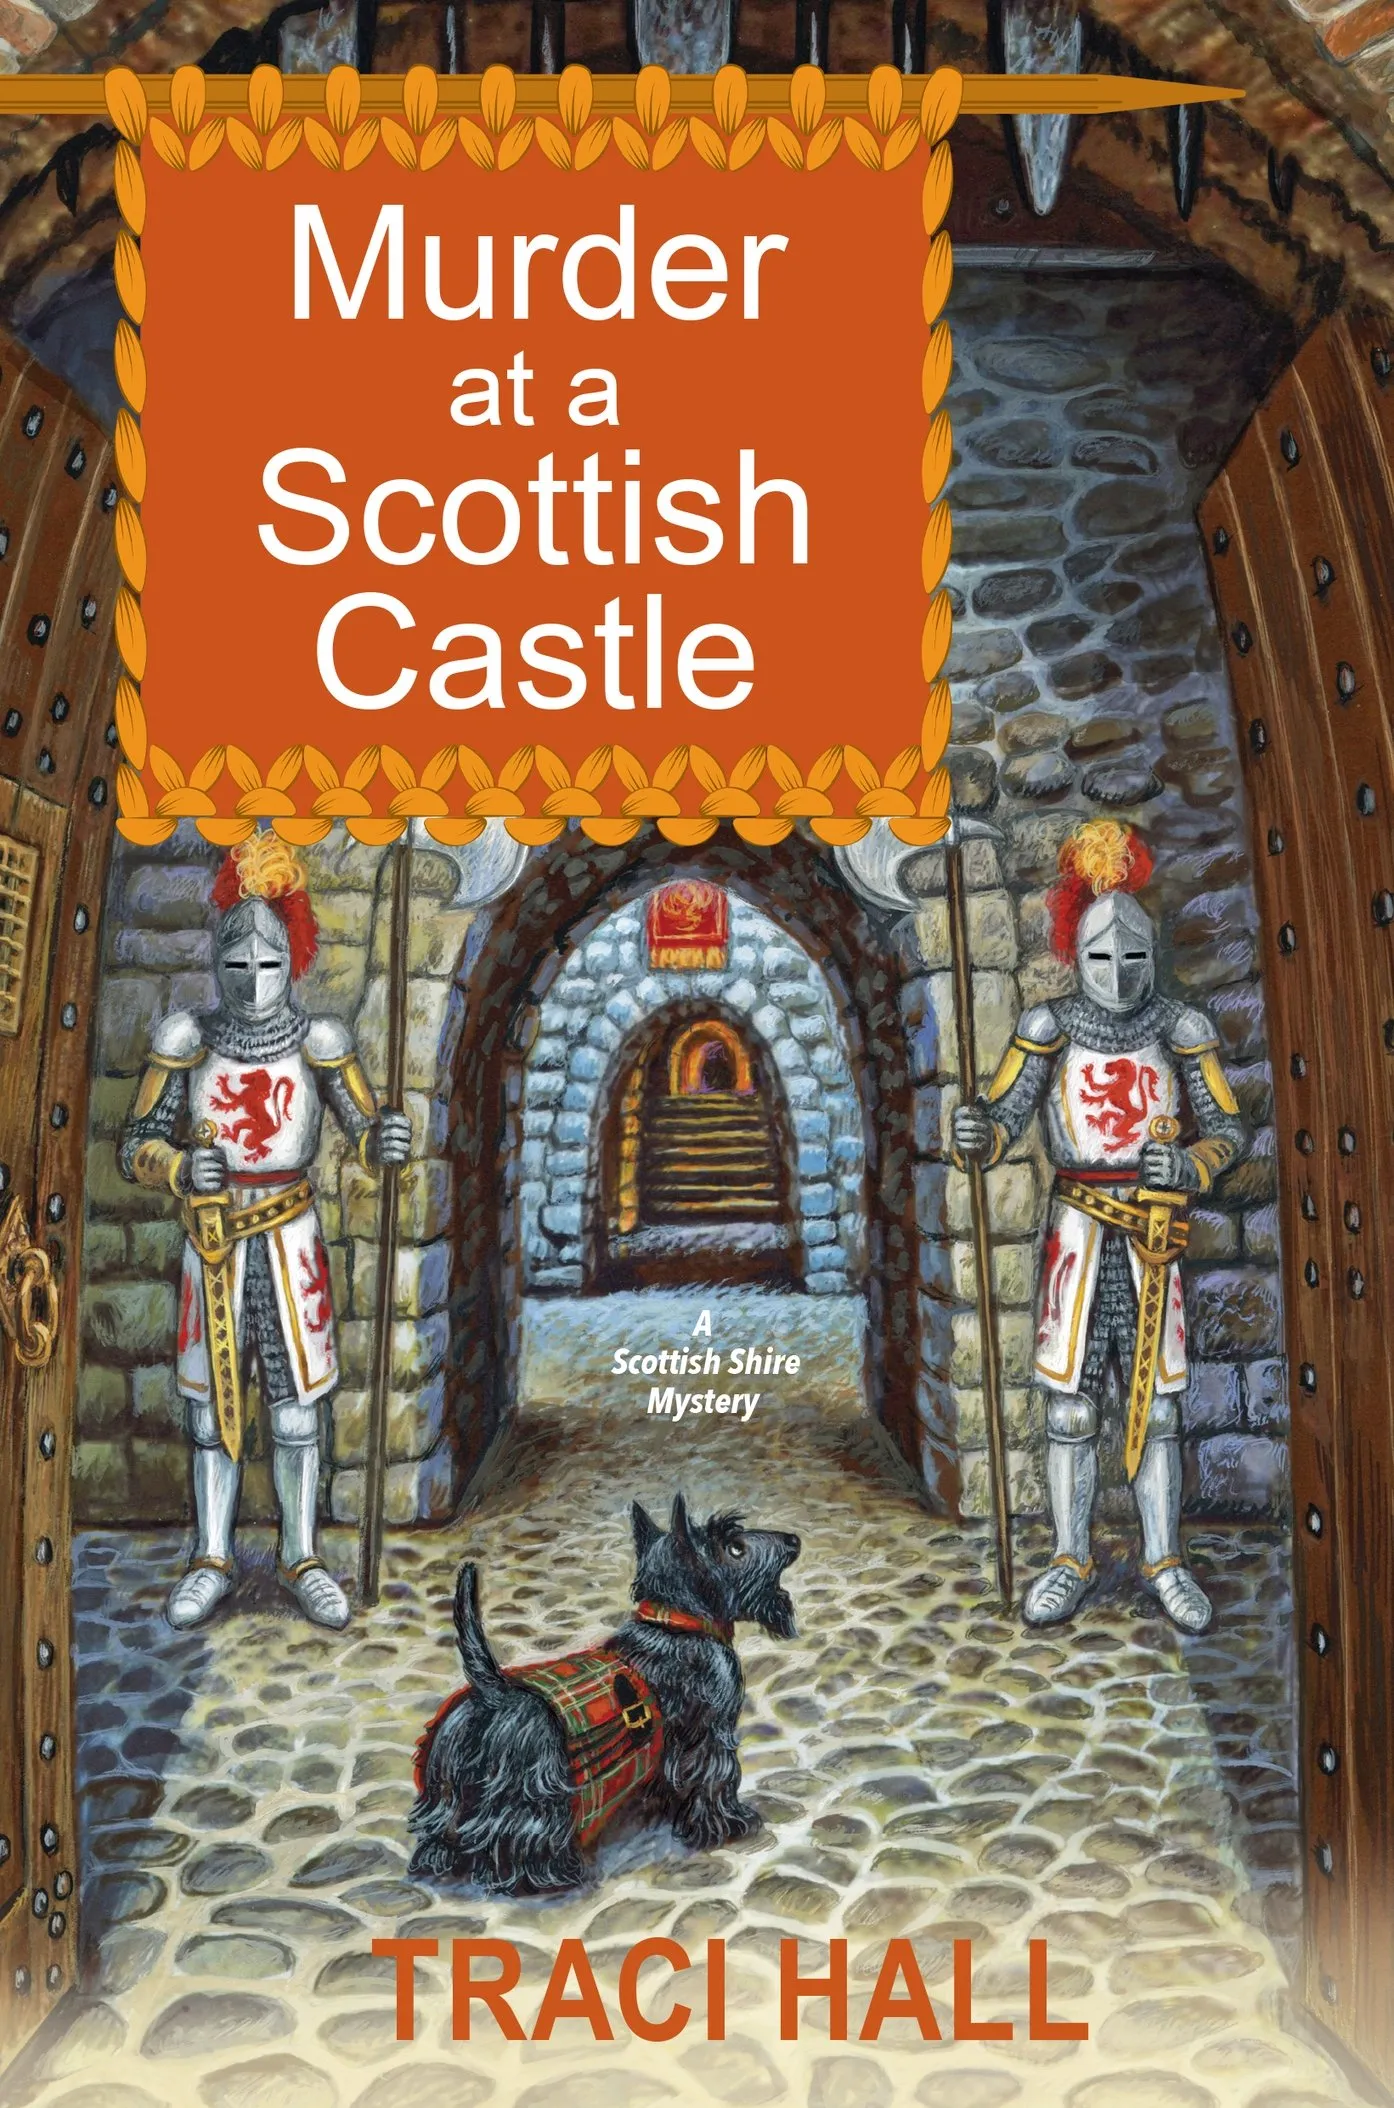 Murder at a Scottish Castle (A Scottish Shire Mystery #5)